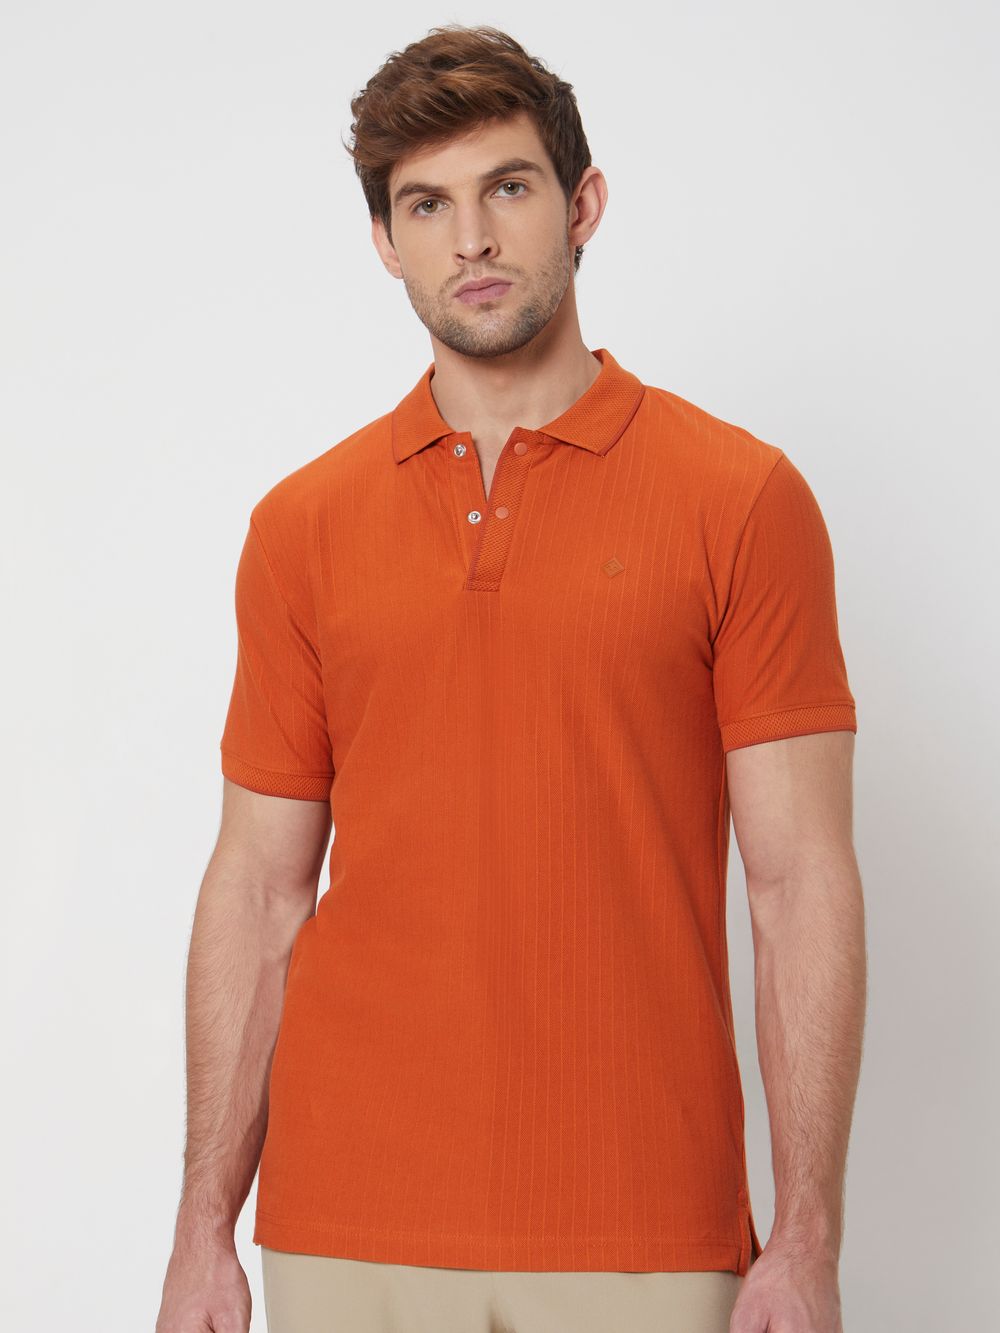 Rust Textured Plain Slim Fit Casual Polo T-Shirt